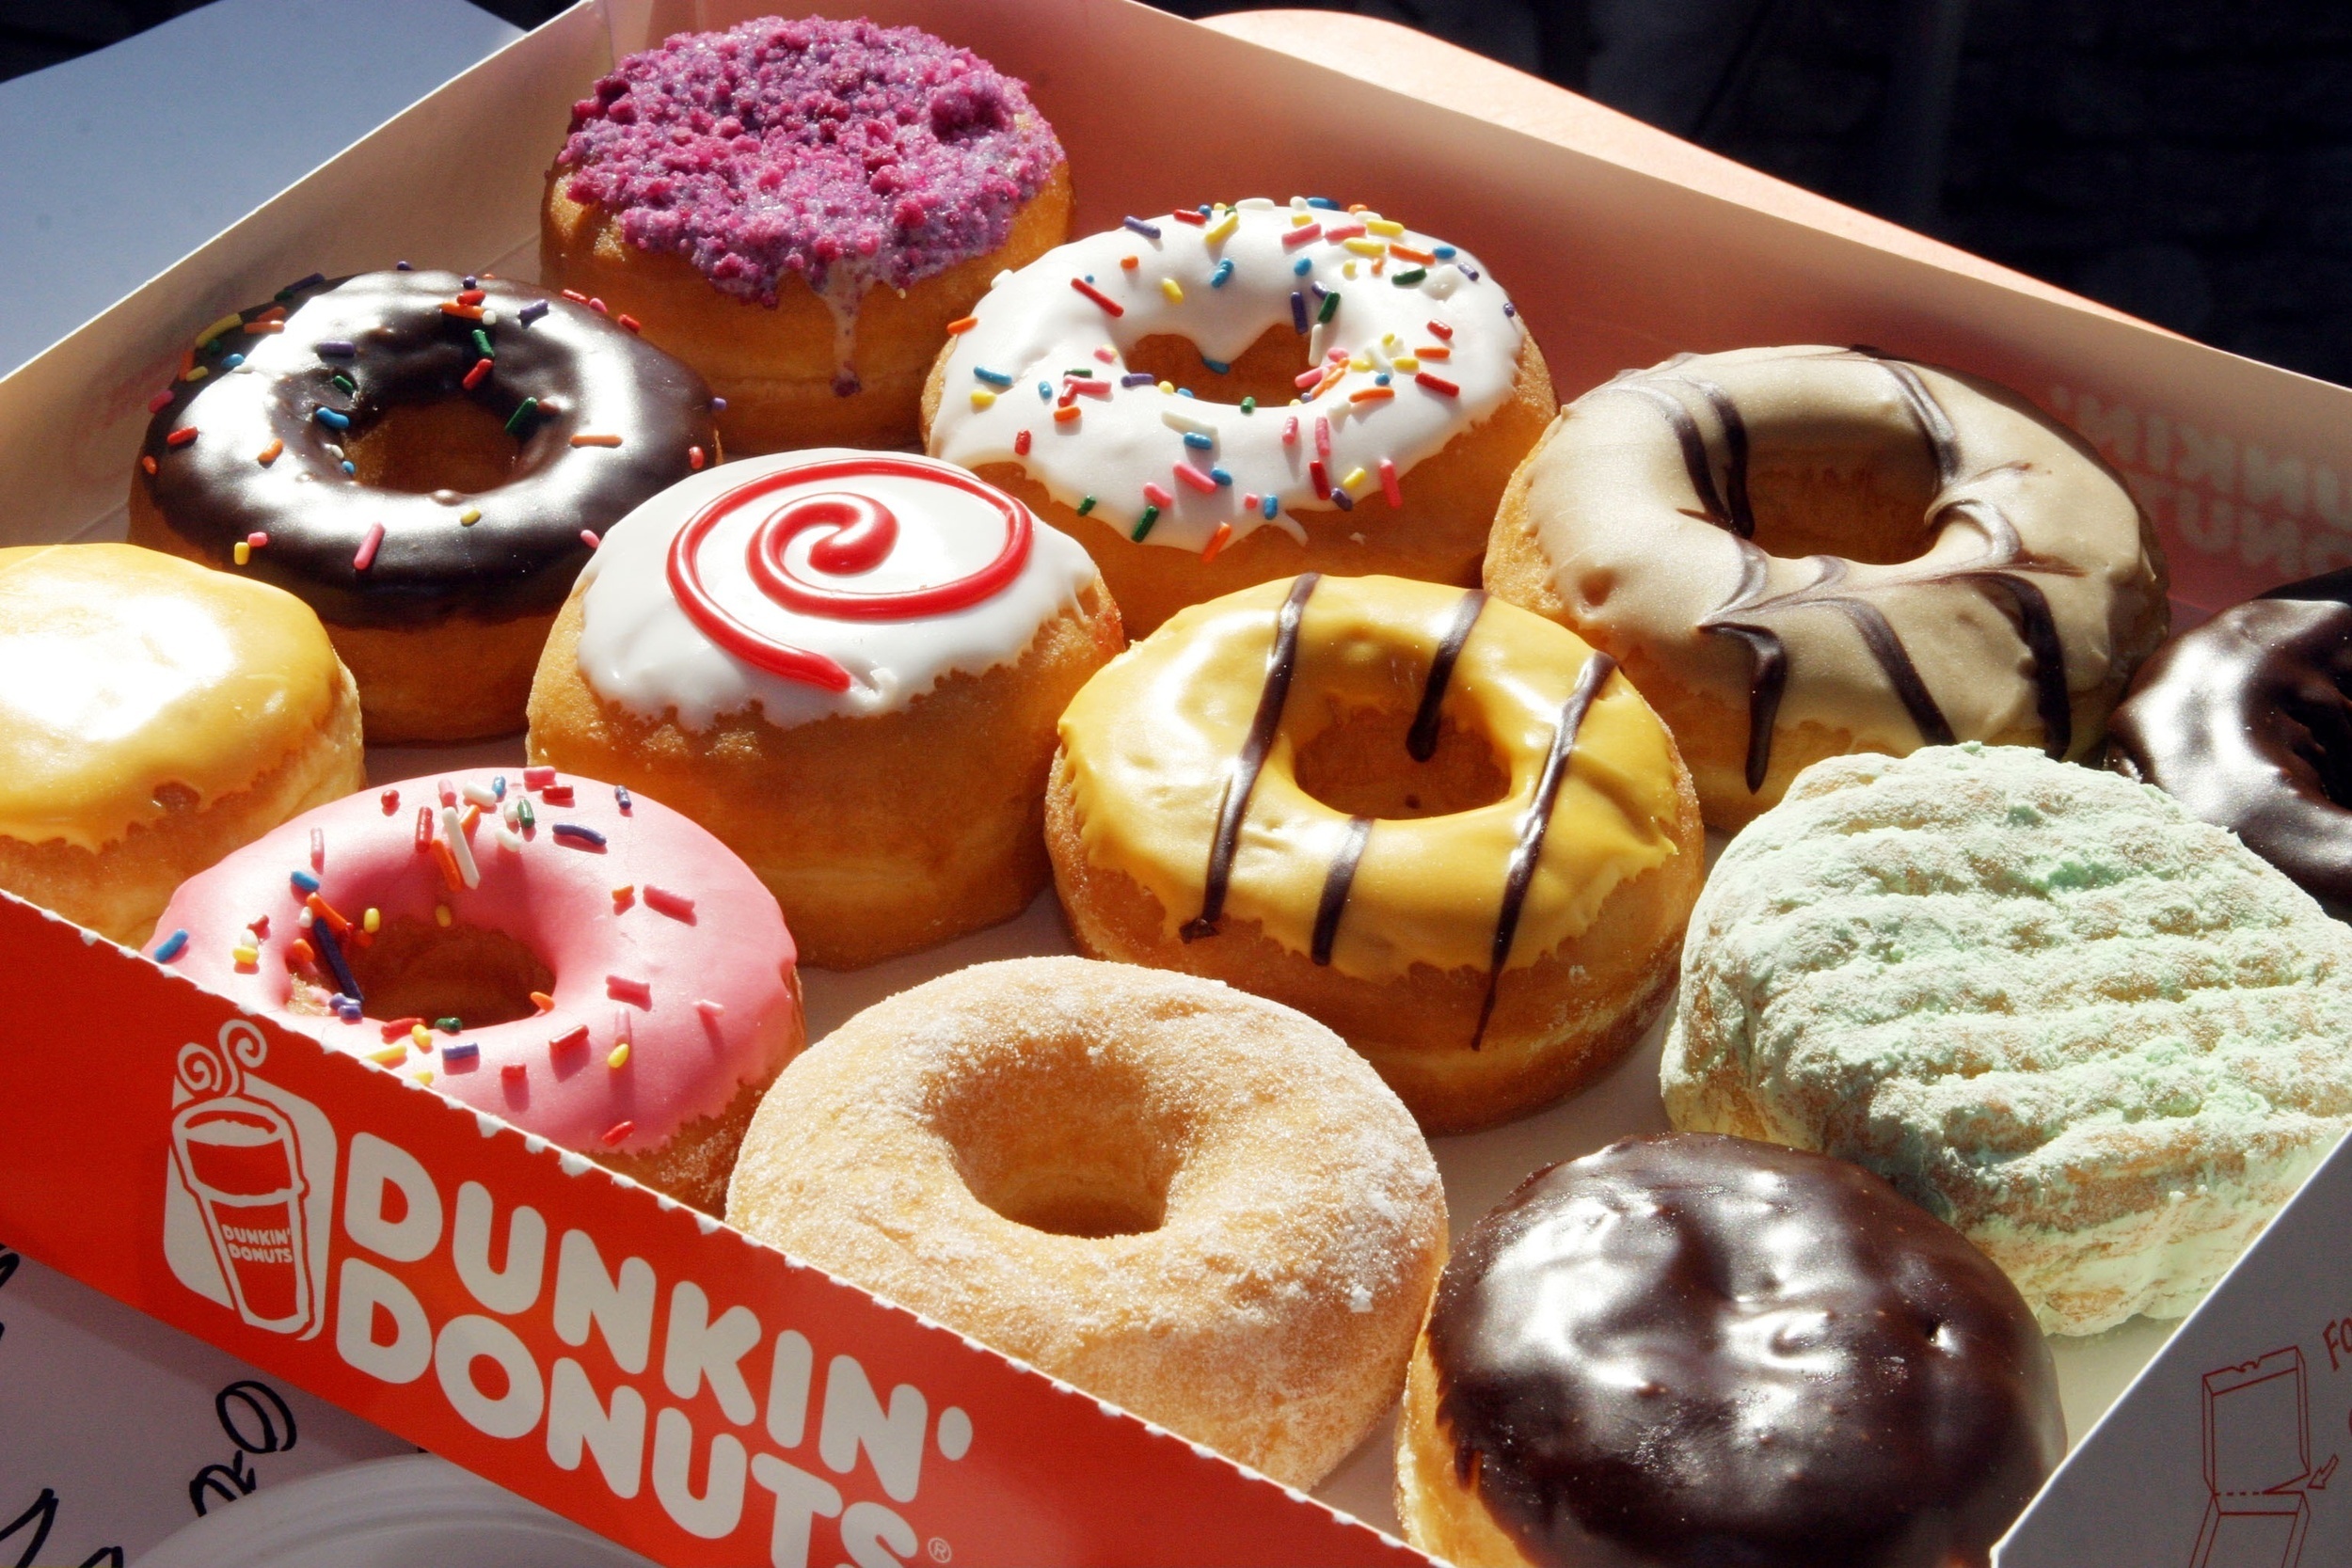 <p>Do you get your coffee or donuts from Dunkin’? If so, you likely have a good grasp of the menu and probably even a go-to order. But how much do you know about the history of Dunkin’? We scoured the company’s past for some fun facts, fascinating stats, and silly stories about the coffee brand America runs on. Here are 21 things you didn’t know about Dunkin’. </p>